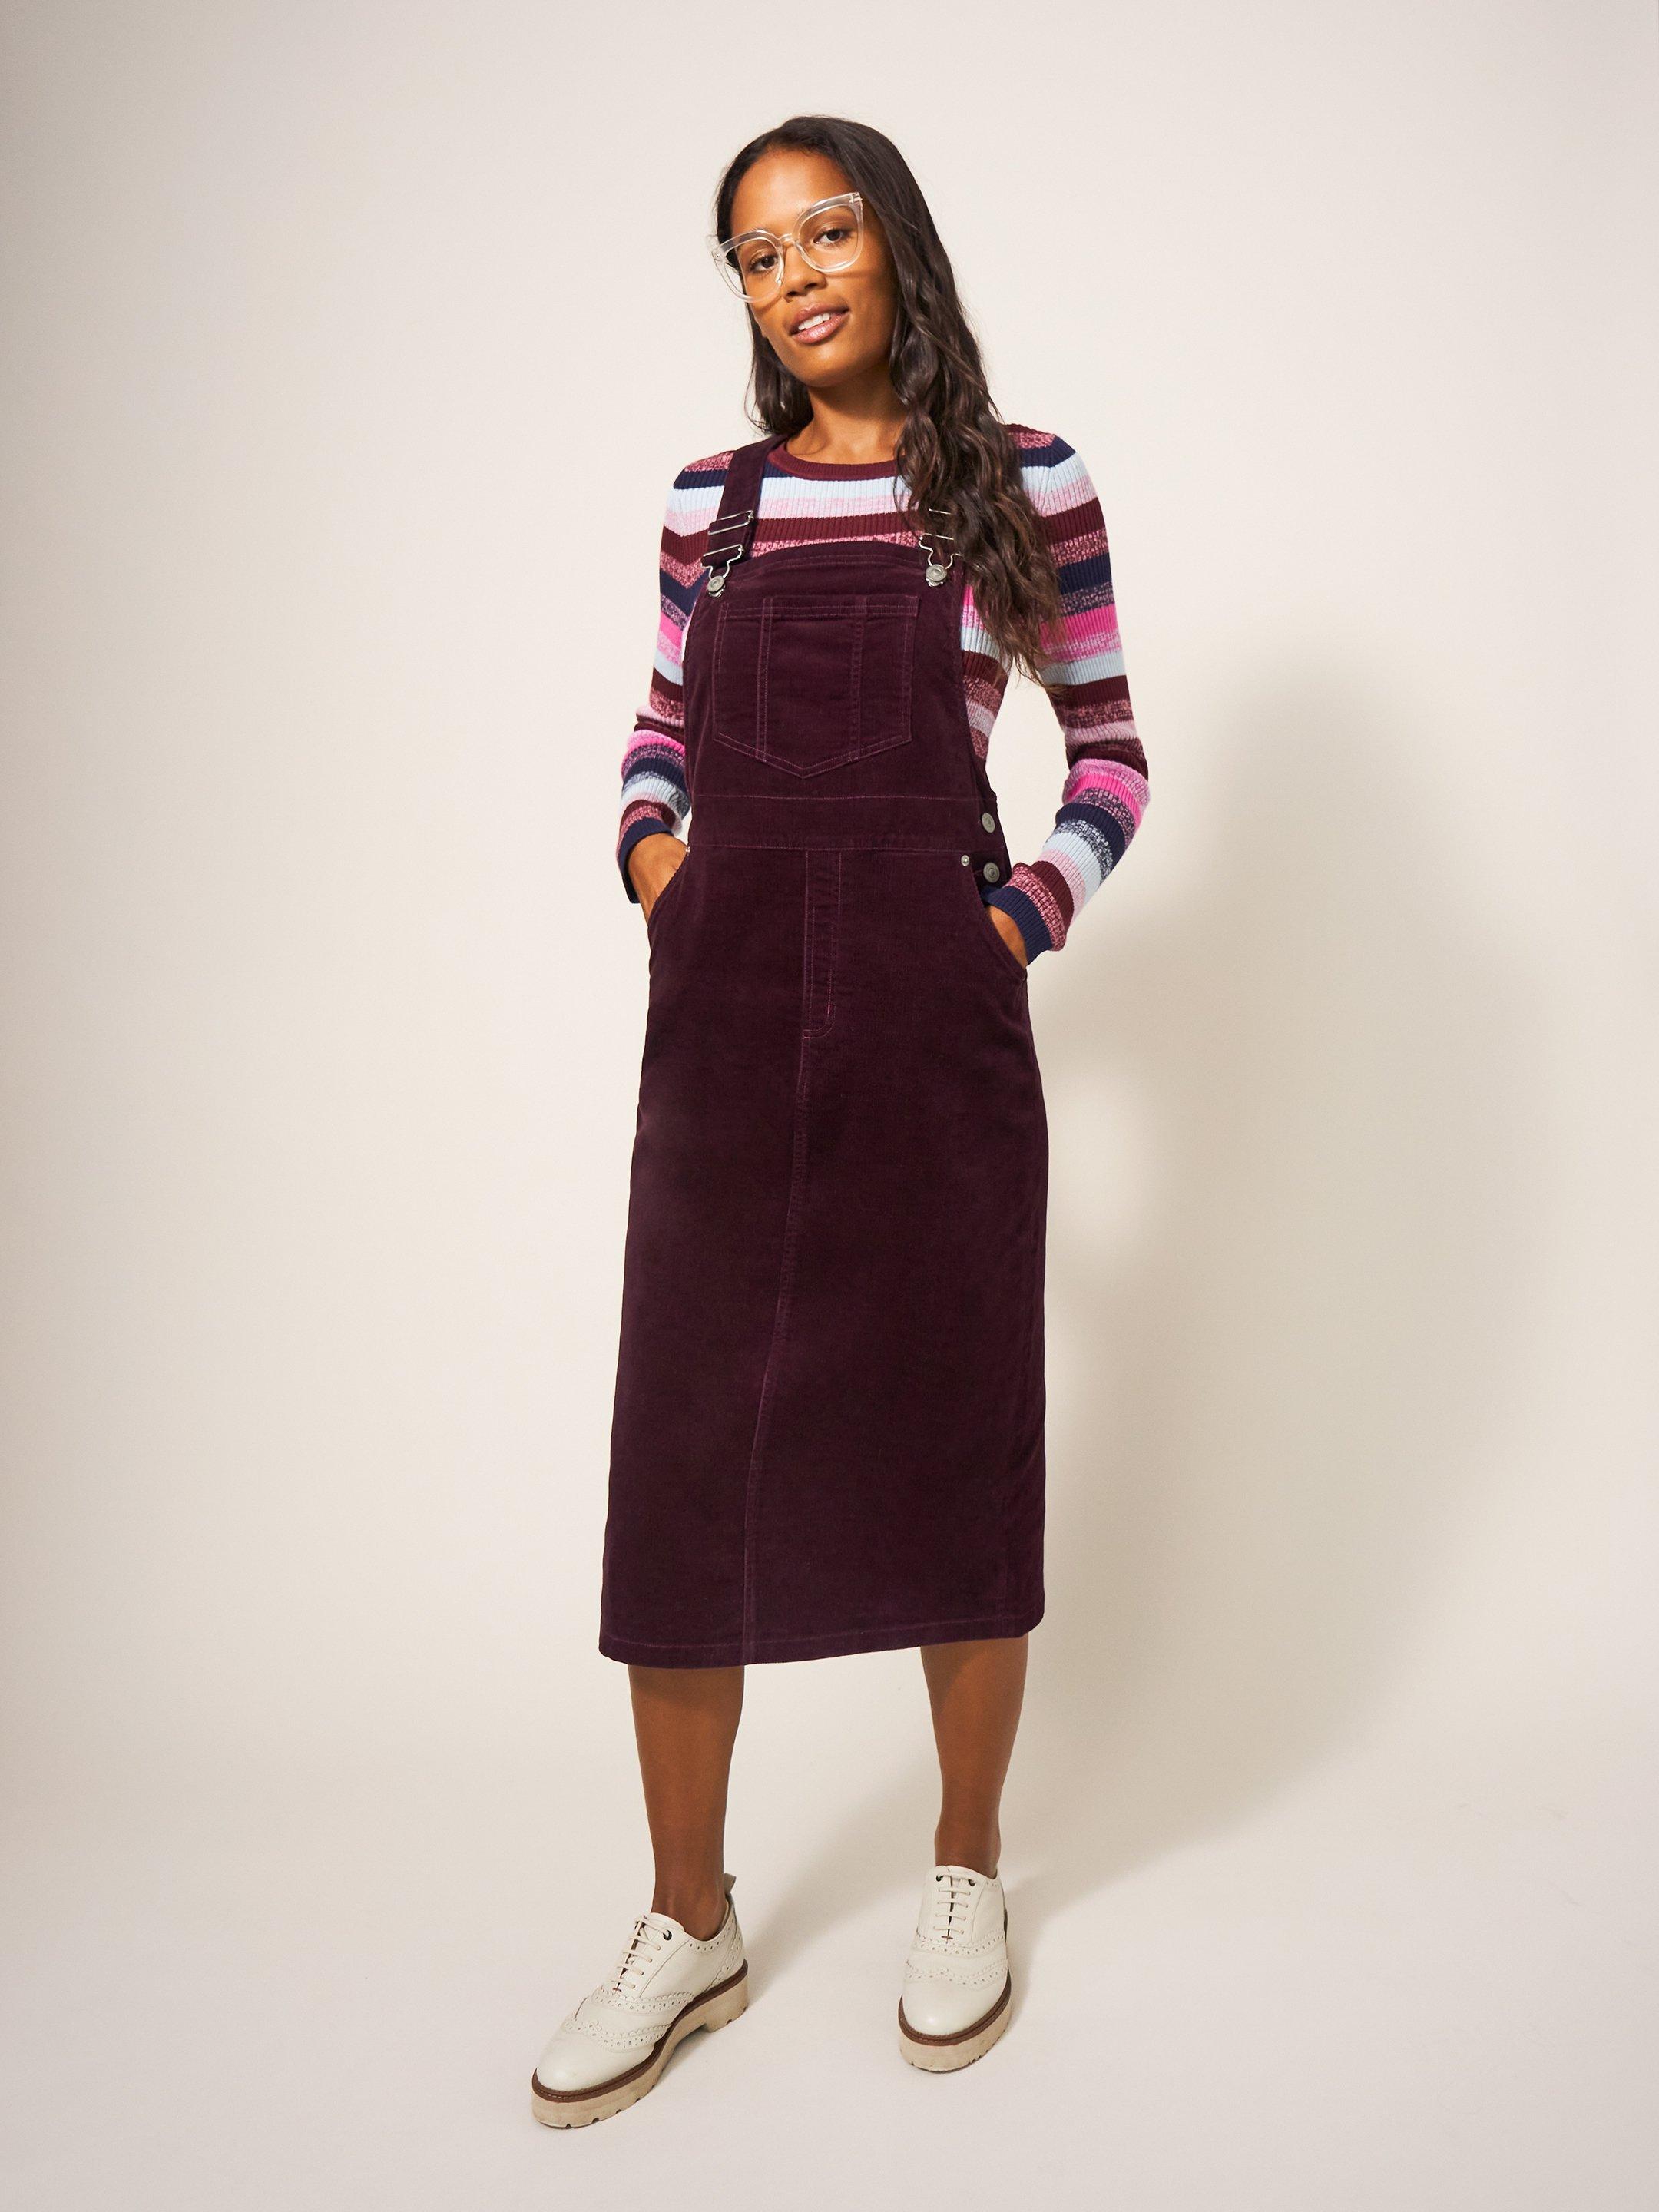 Emmie Organic Cord Pinafore in DK PLUM - LIFESTYLE